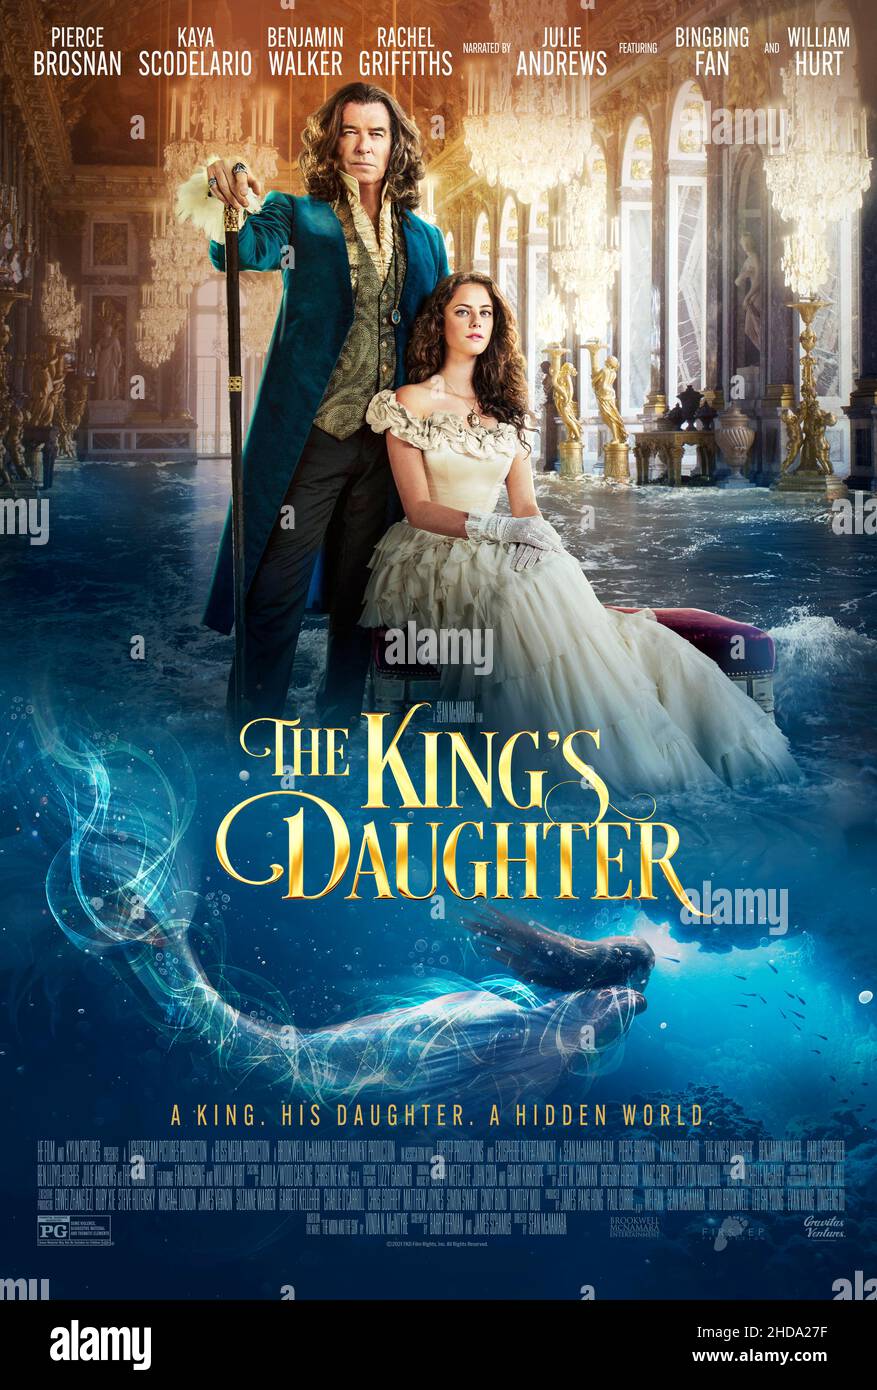 RELEASE DATE: January 21, 2022. TITLE: The King's Daughter. STUDIO: Gravitas Ventures. DIRECTOR: Sean McNamara. PLOT: King Louis XIV's quest for immortality leads him to capture and steal a mermaid's life force, a move that is further complicated by his illegitimate daughter's discovery of the creature. STARRING: PIERCE BROSNAN as King Louis XIV, KAYA SCODELARIO as Marie-Josephe D'Alember poster art. (Credit Image: © Gravitas Ventures/Entertainment Pictures) Stock Photo